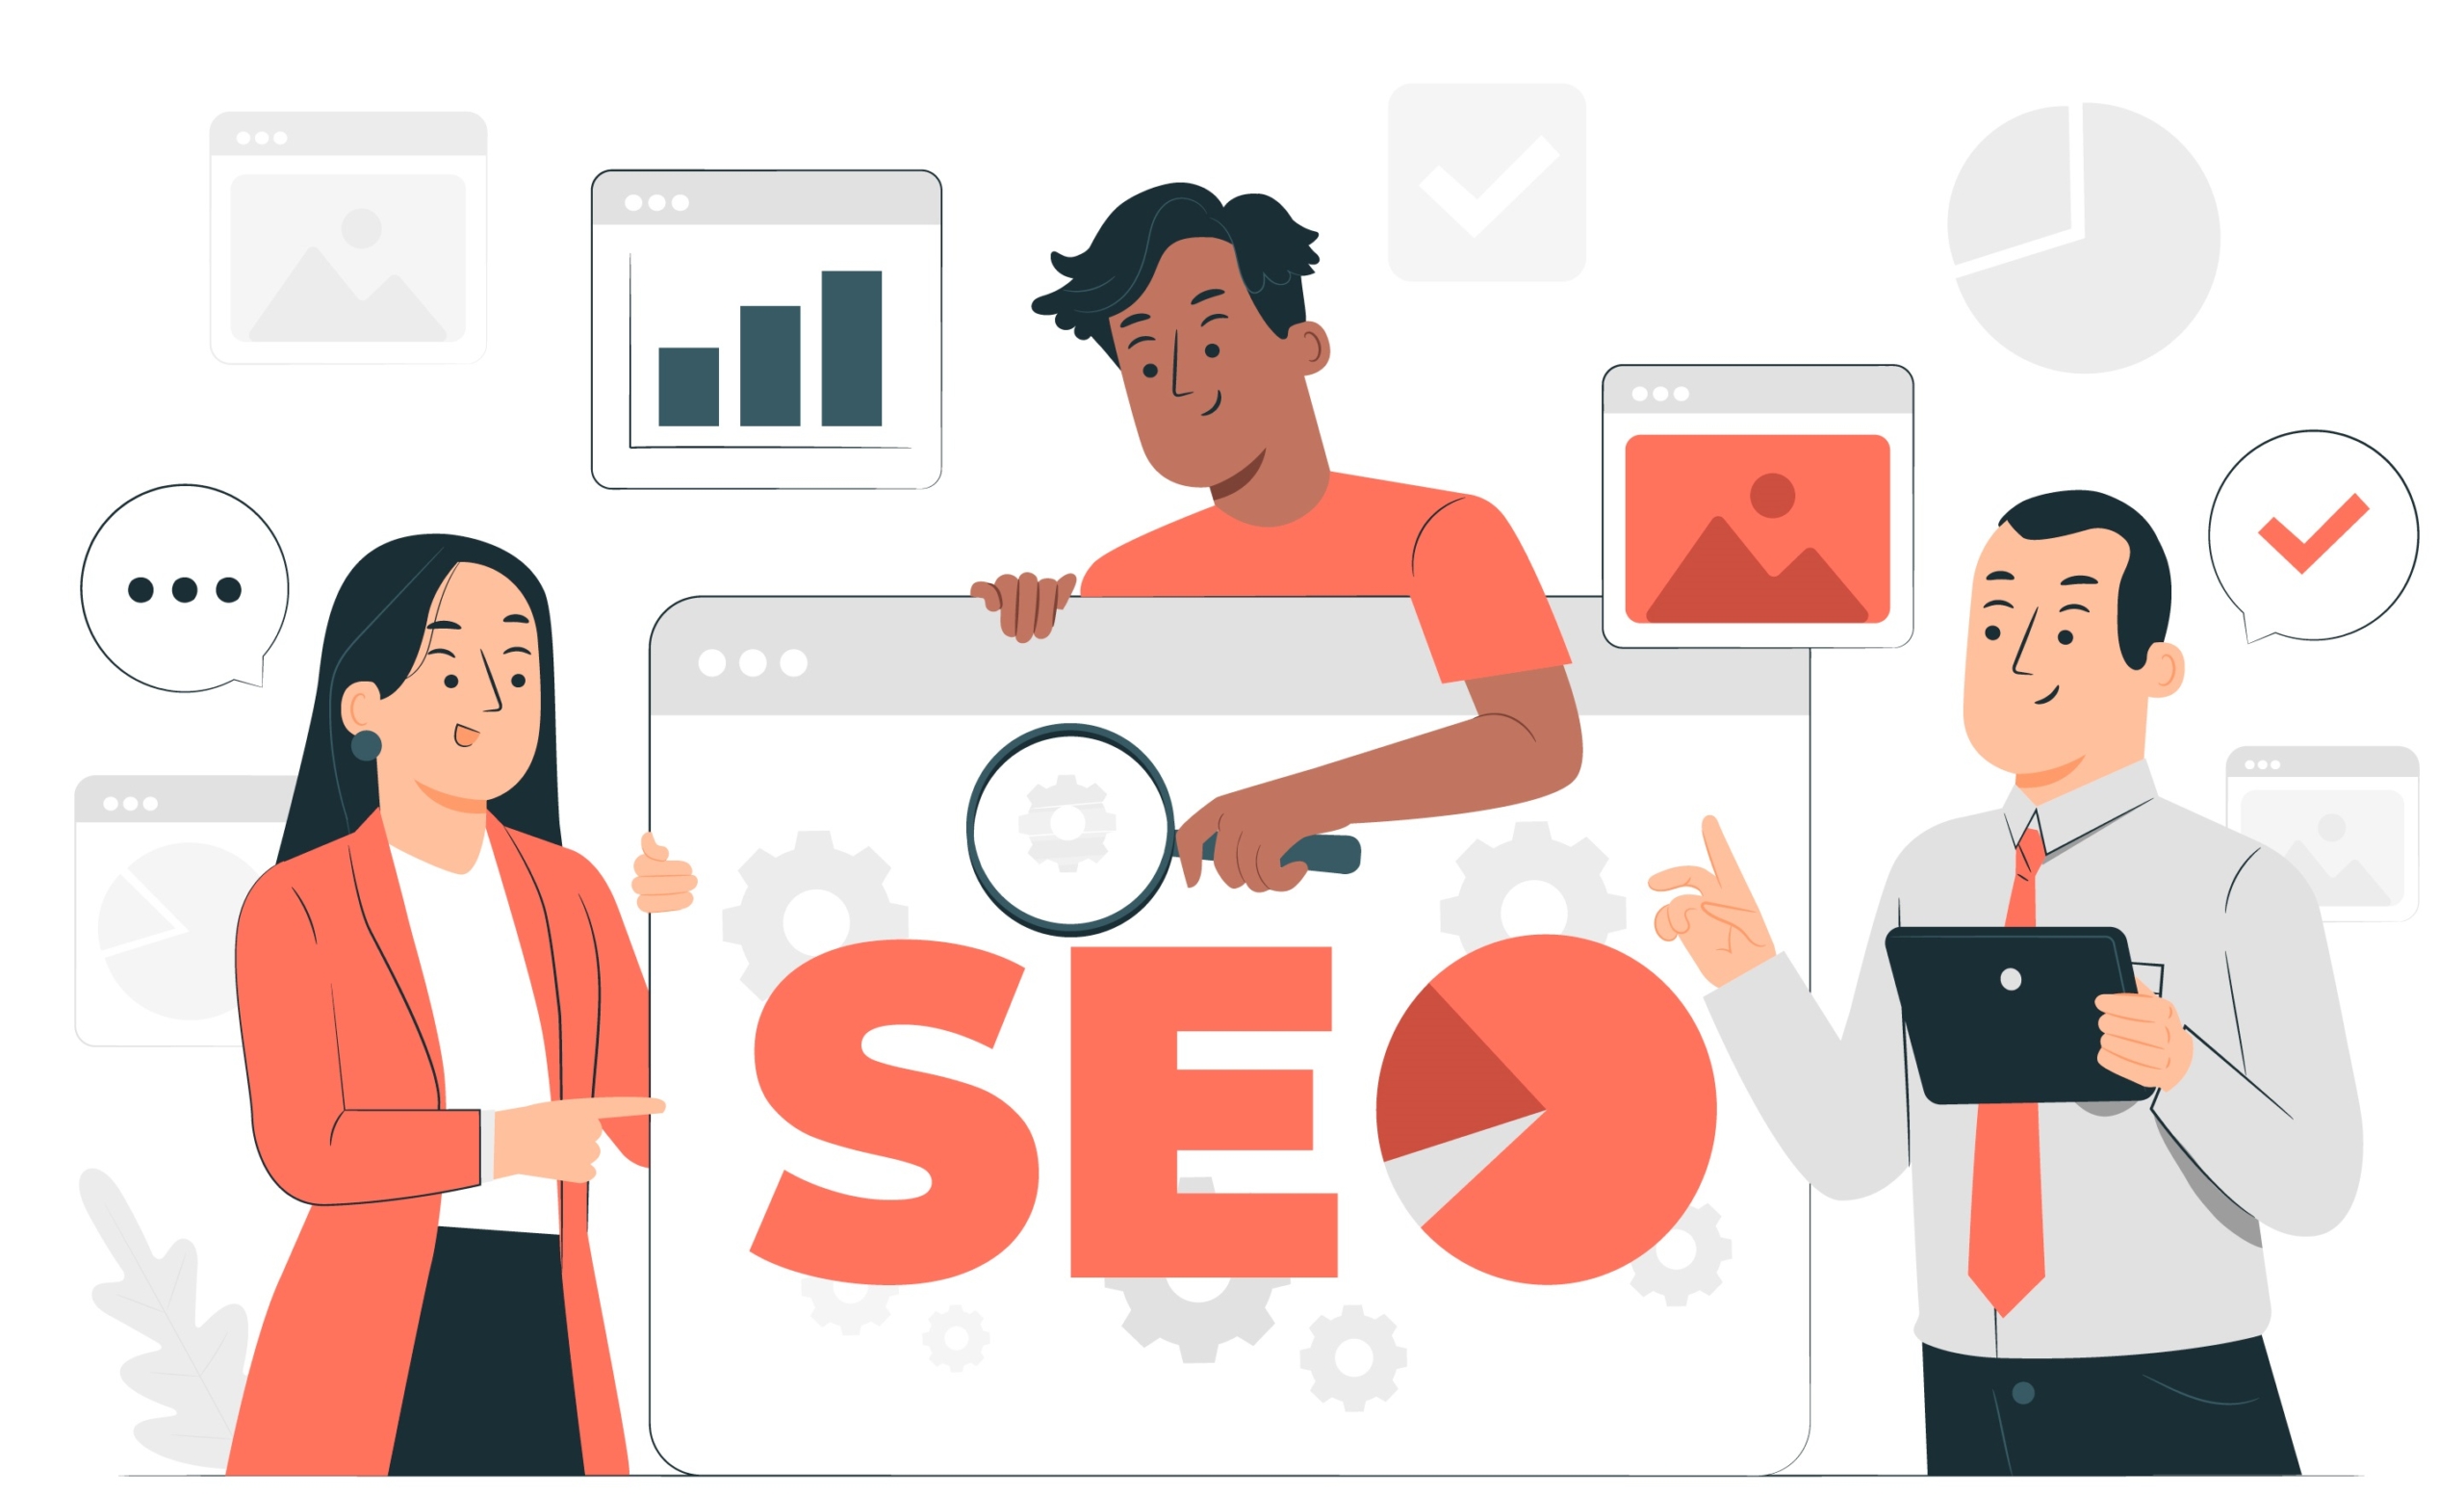 SEO vector image with icons representing search engine optimization elements